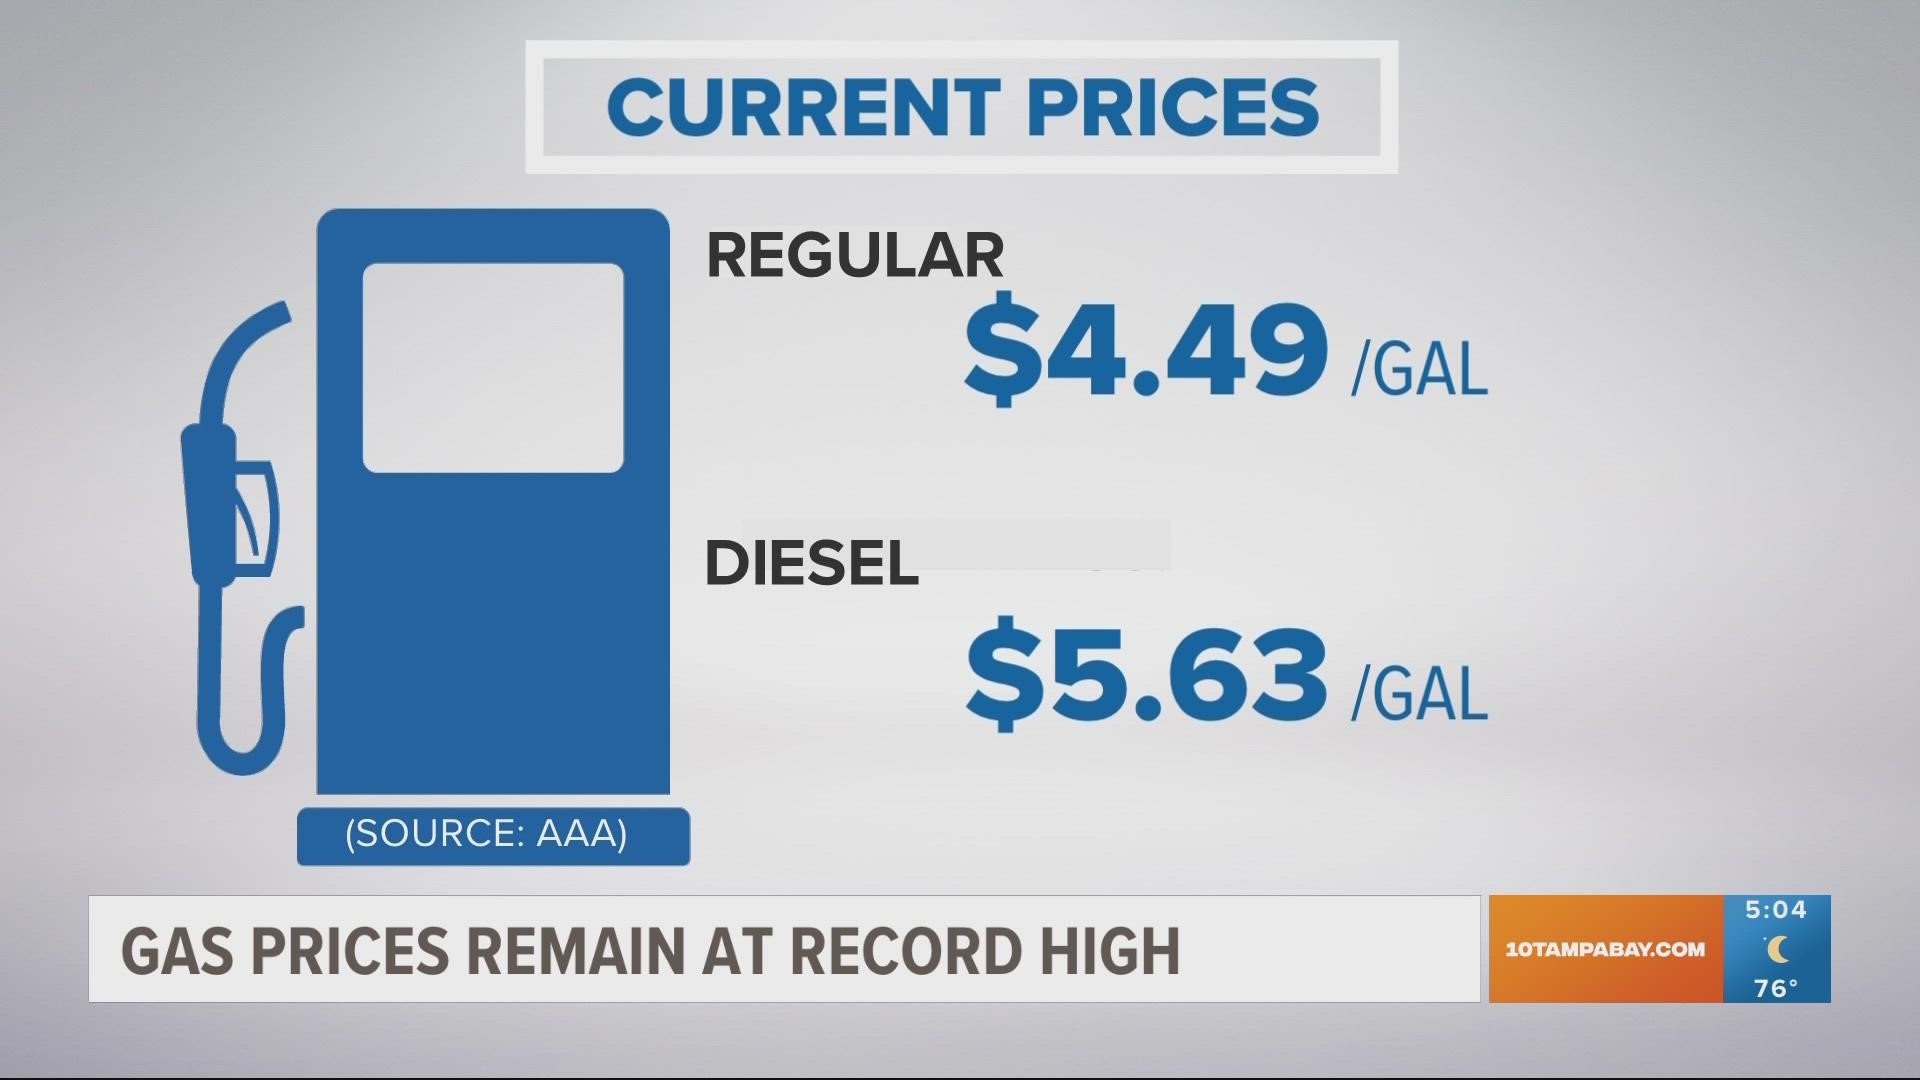 Analysts say record-high oil prices are coming.